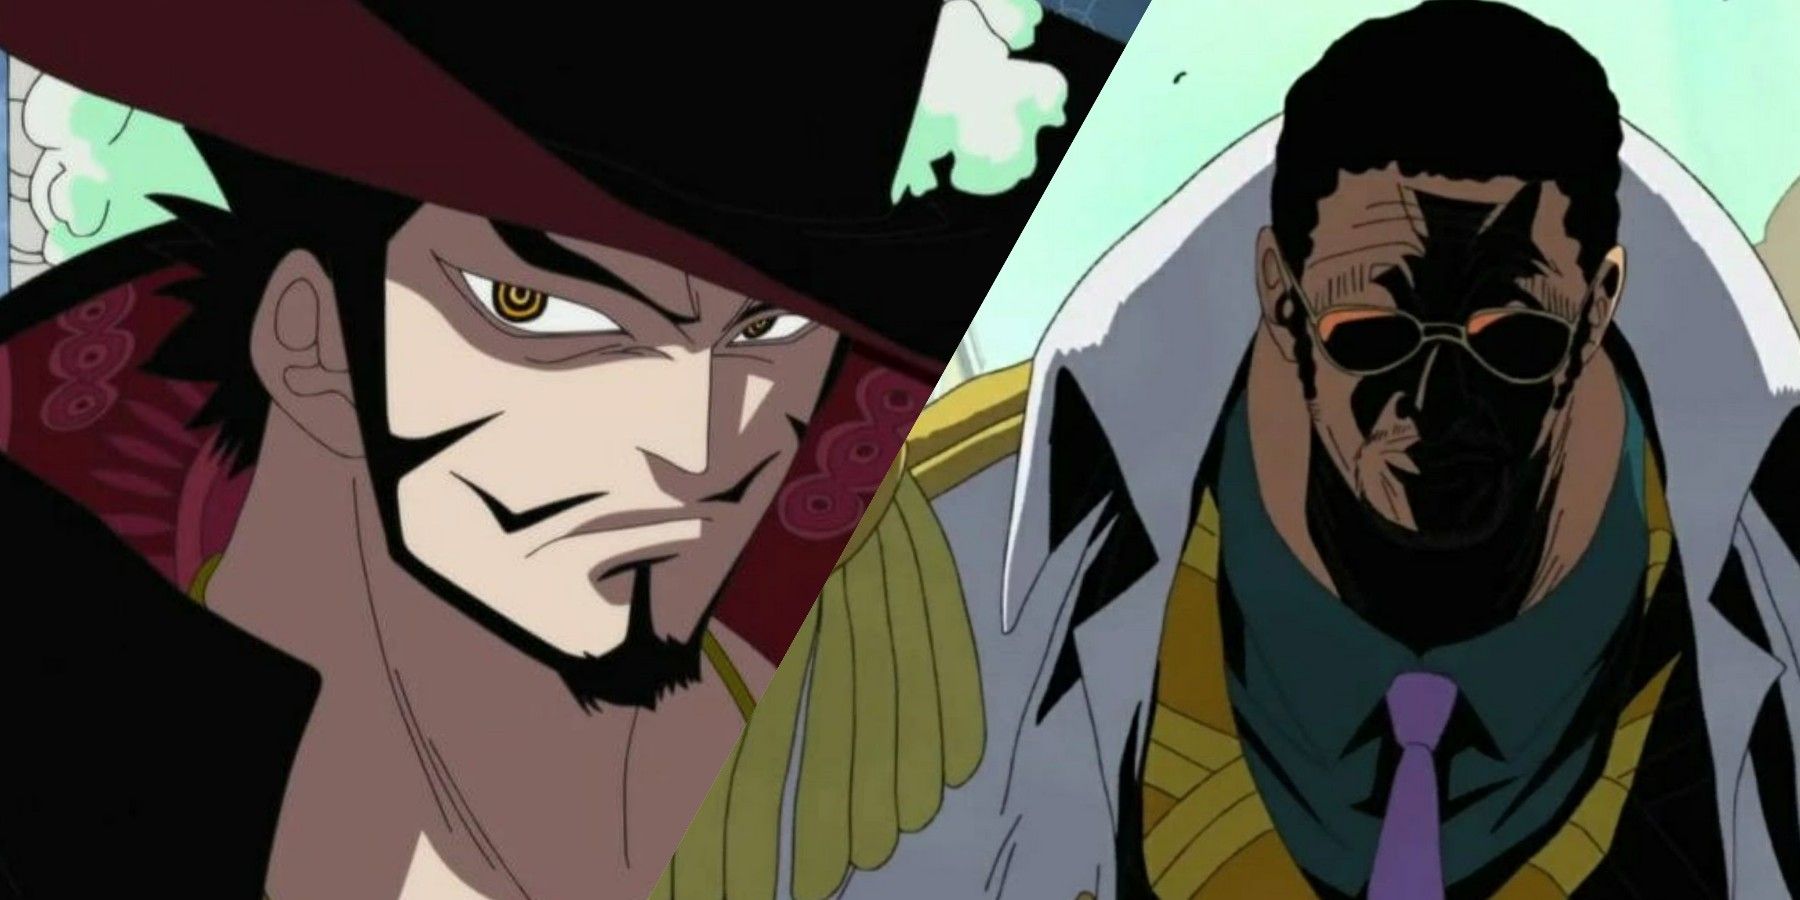 Featured Yet To See In Action Mihawk Kizaru